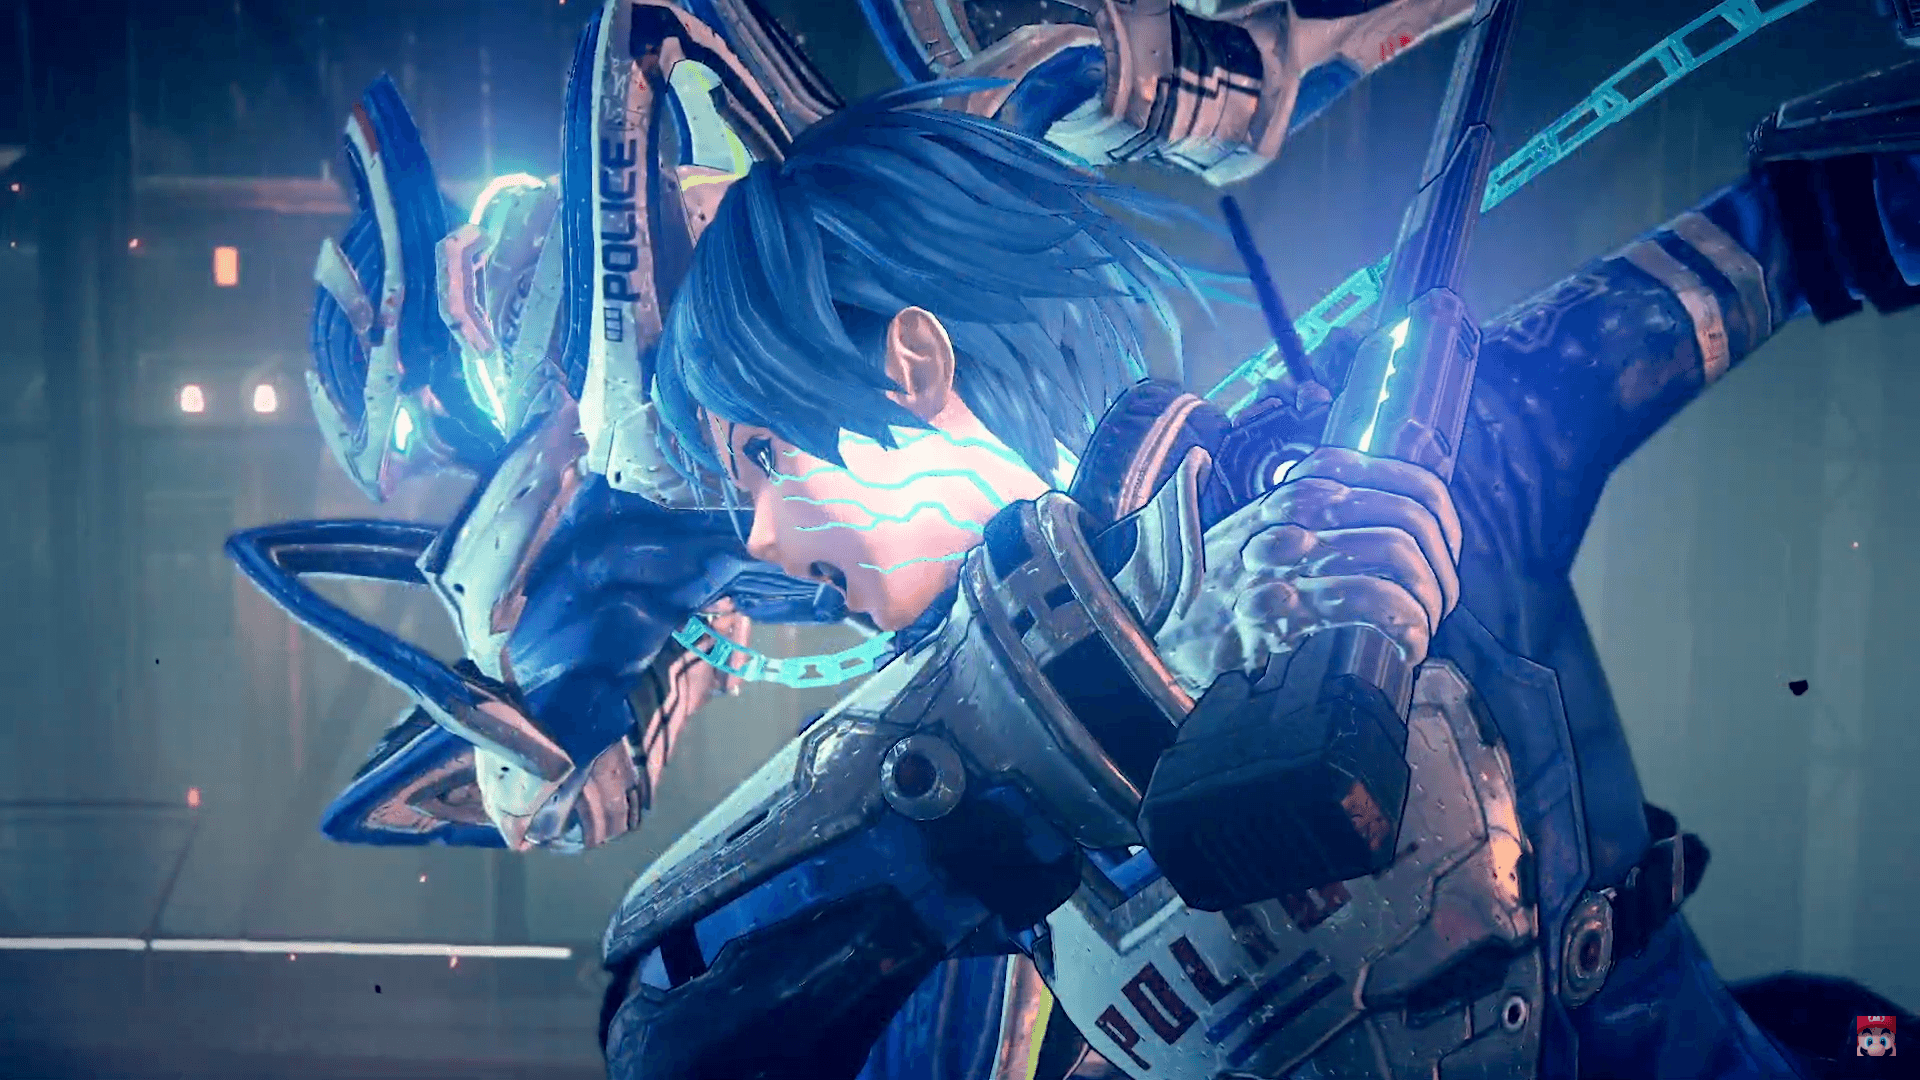 Astral Chain from Platinum Games launches Aug. 30 on Switch